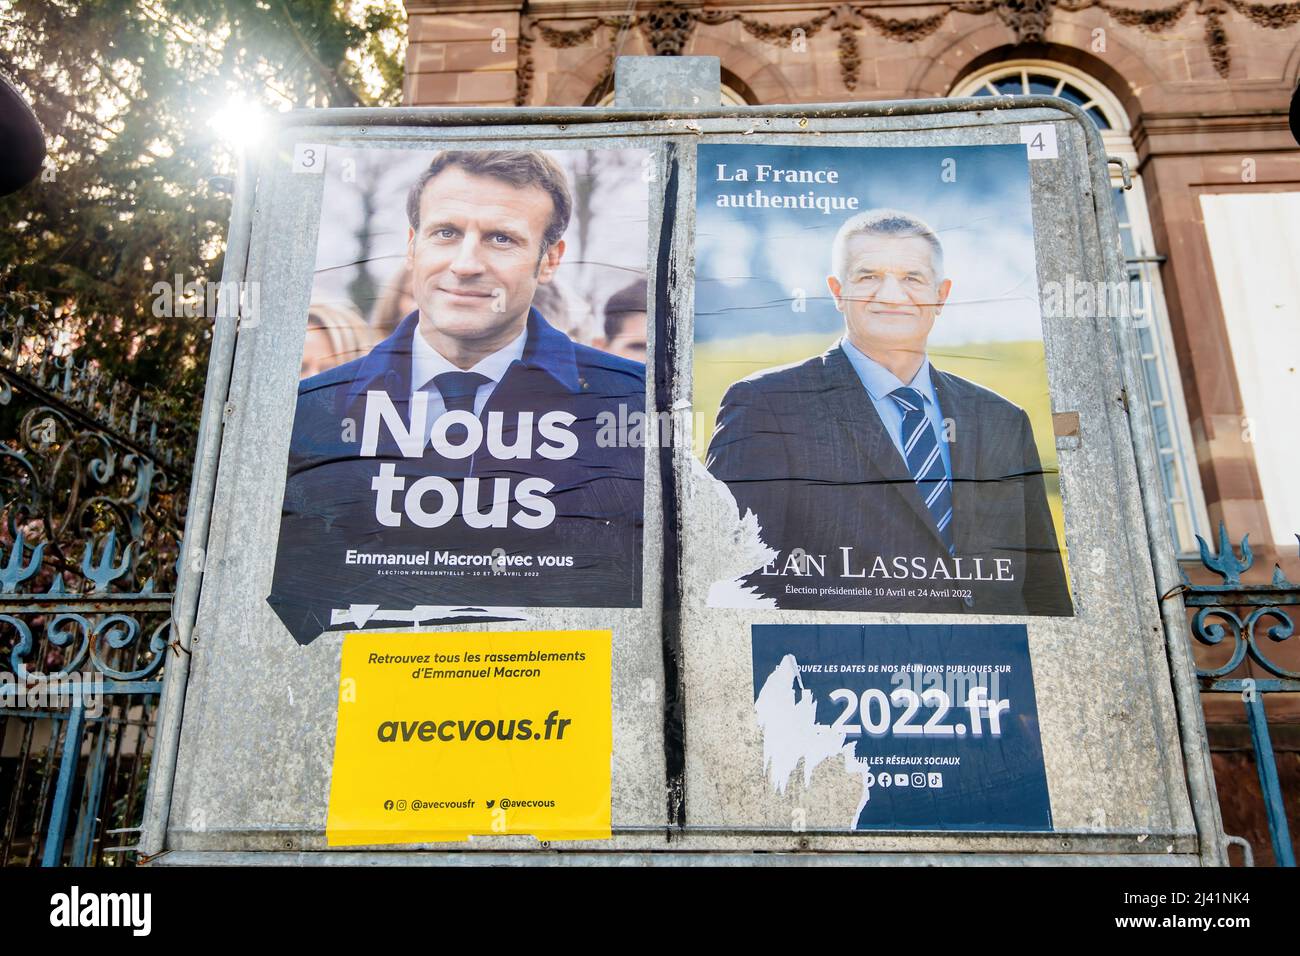 STRASBOURG, FRANCE - APR 23, 2022: French presidential posters for the upcoming presidential election in France, in front of the City Hall building in Strasbourg featuring Emmanuel Macron and Jean Lassale Stock Photo